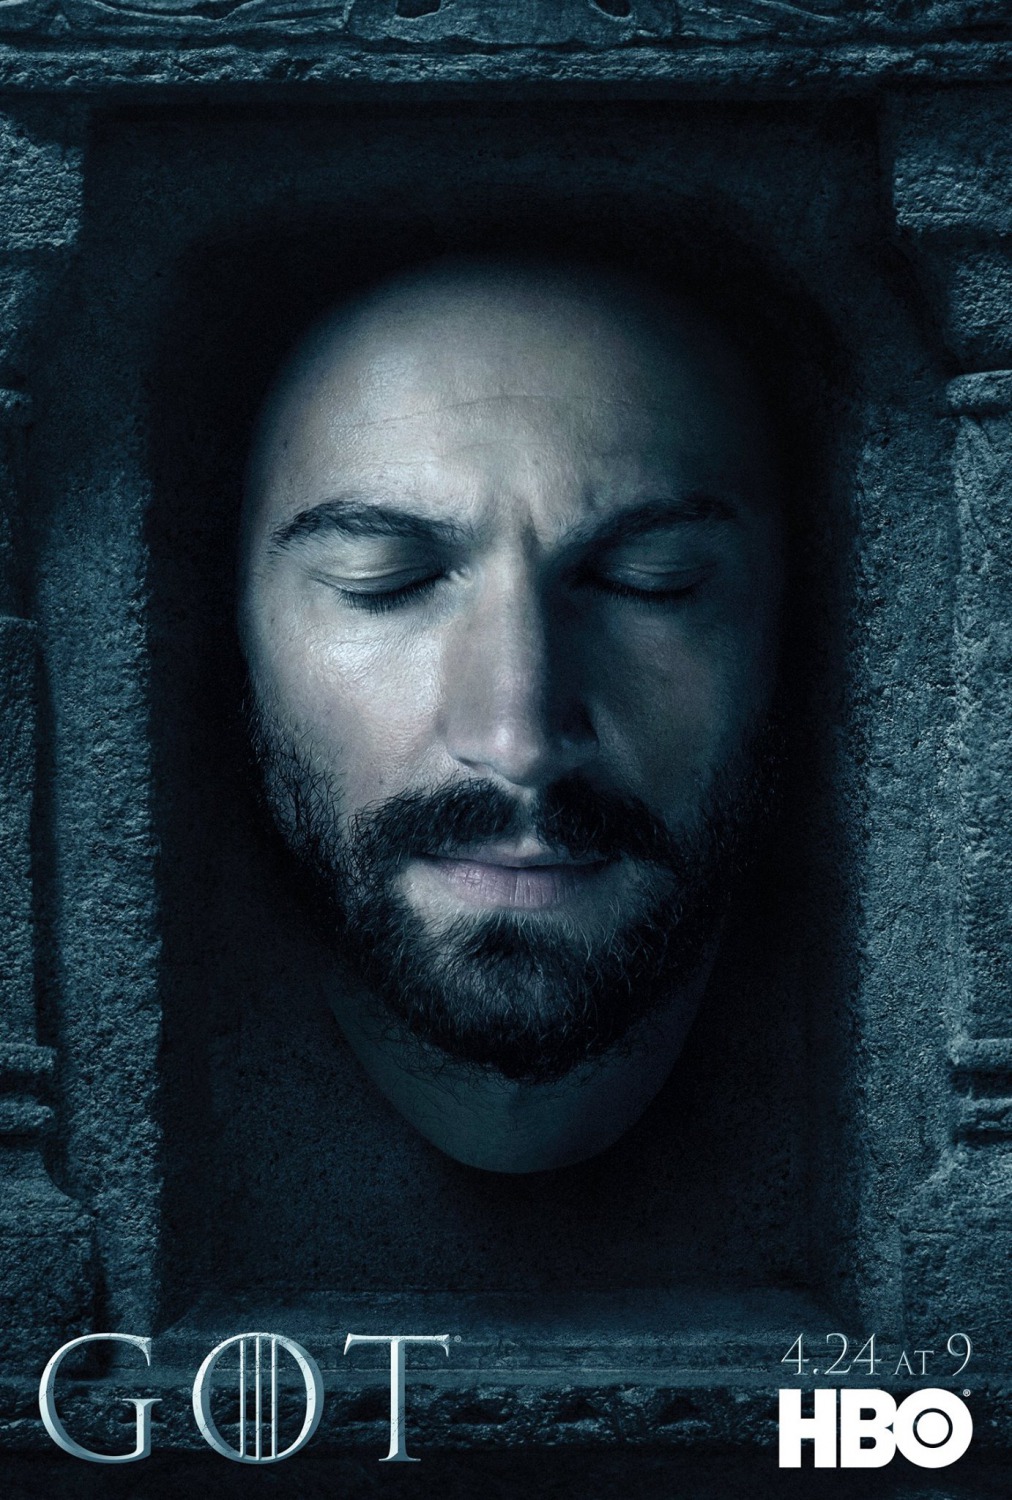 Extra Large TV Poster Image for Game of Thrones (#70 of 125)